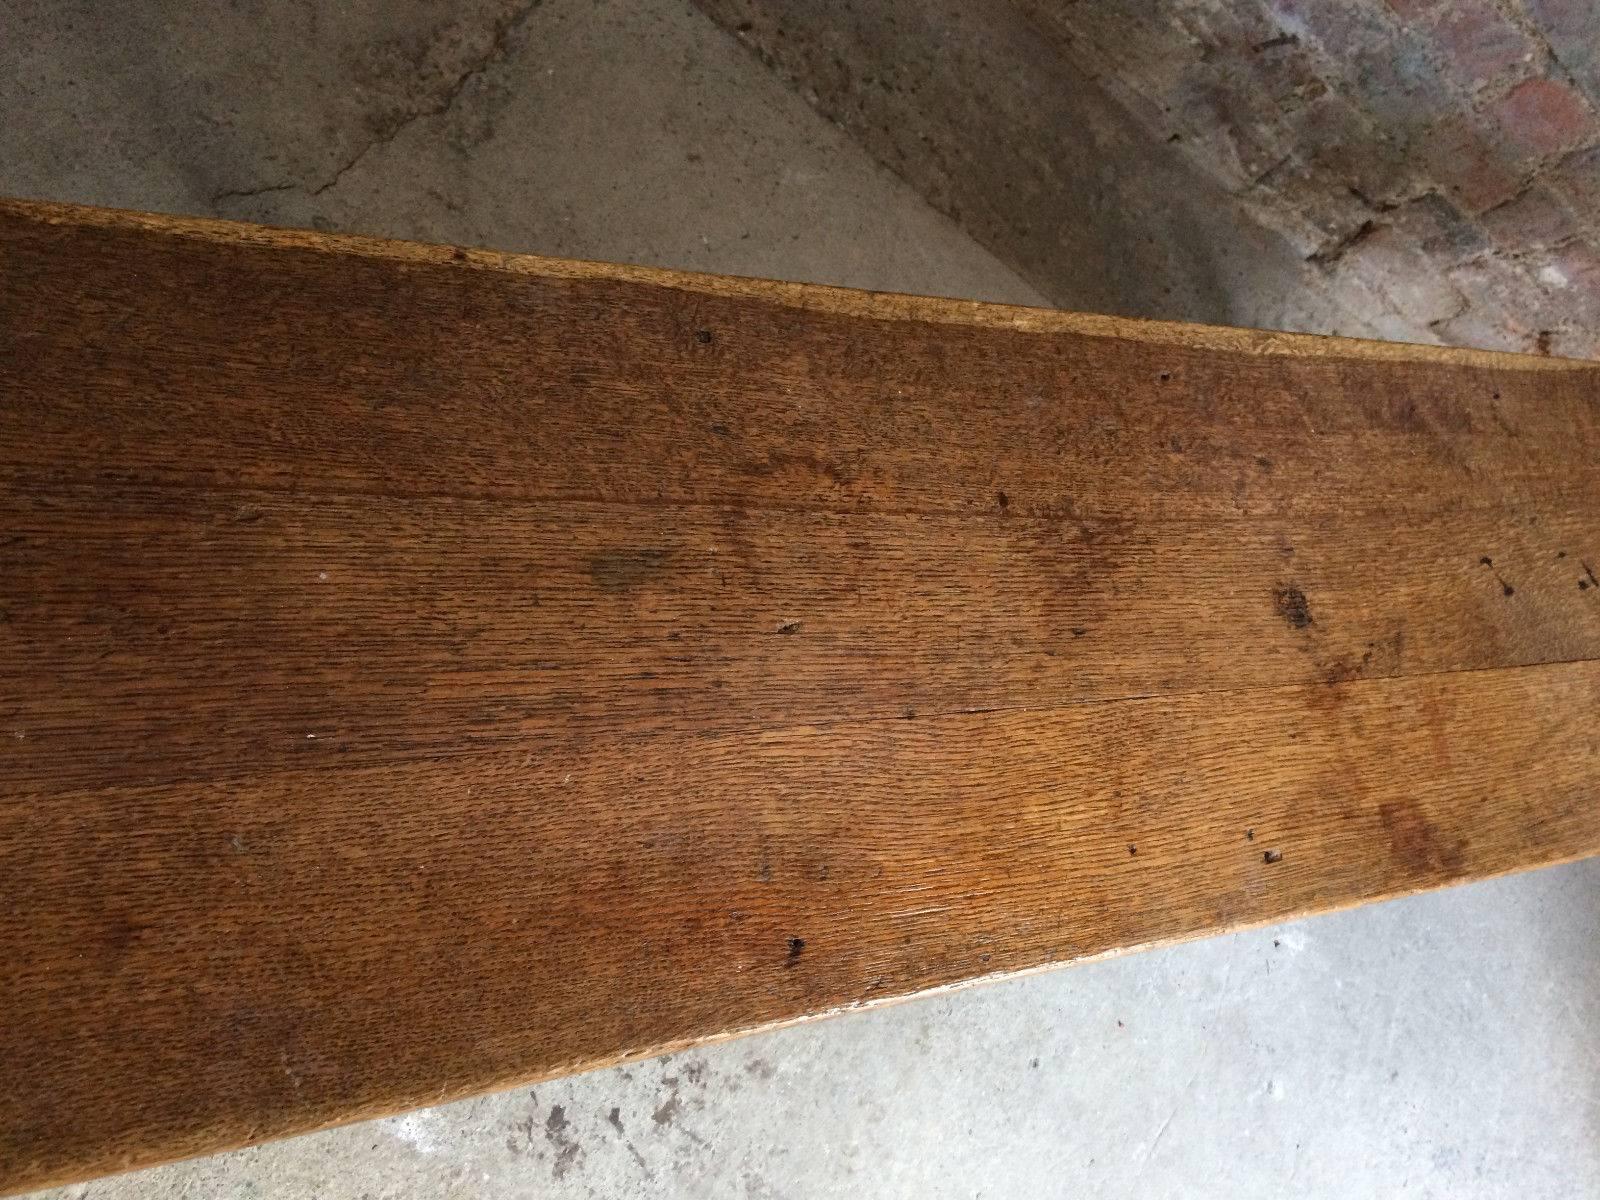 Antique Long Bench Seat Large Rustic, 19th Century Victorian, circa 1870 In Good Condition For Sale In Longdon, Tewkesbury